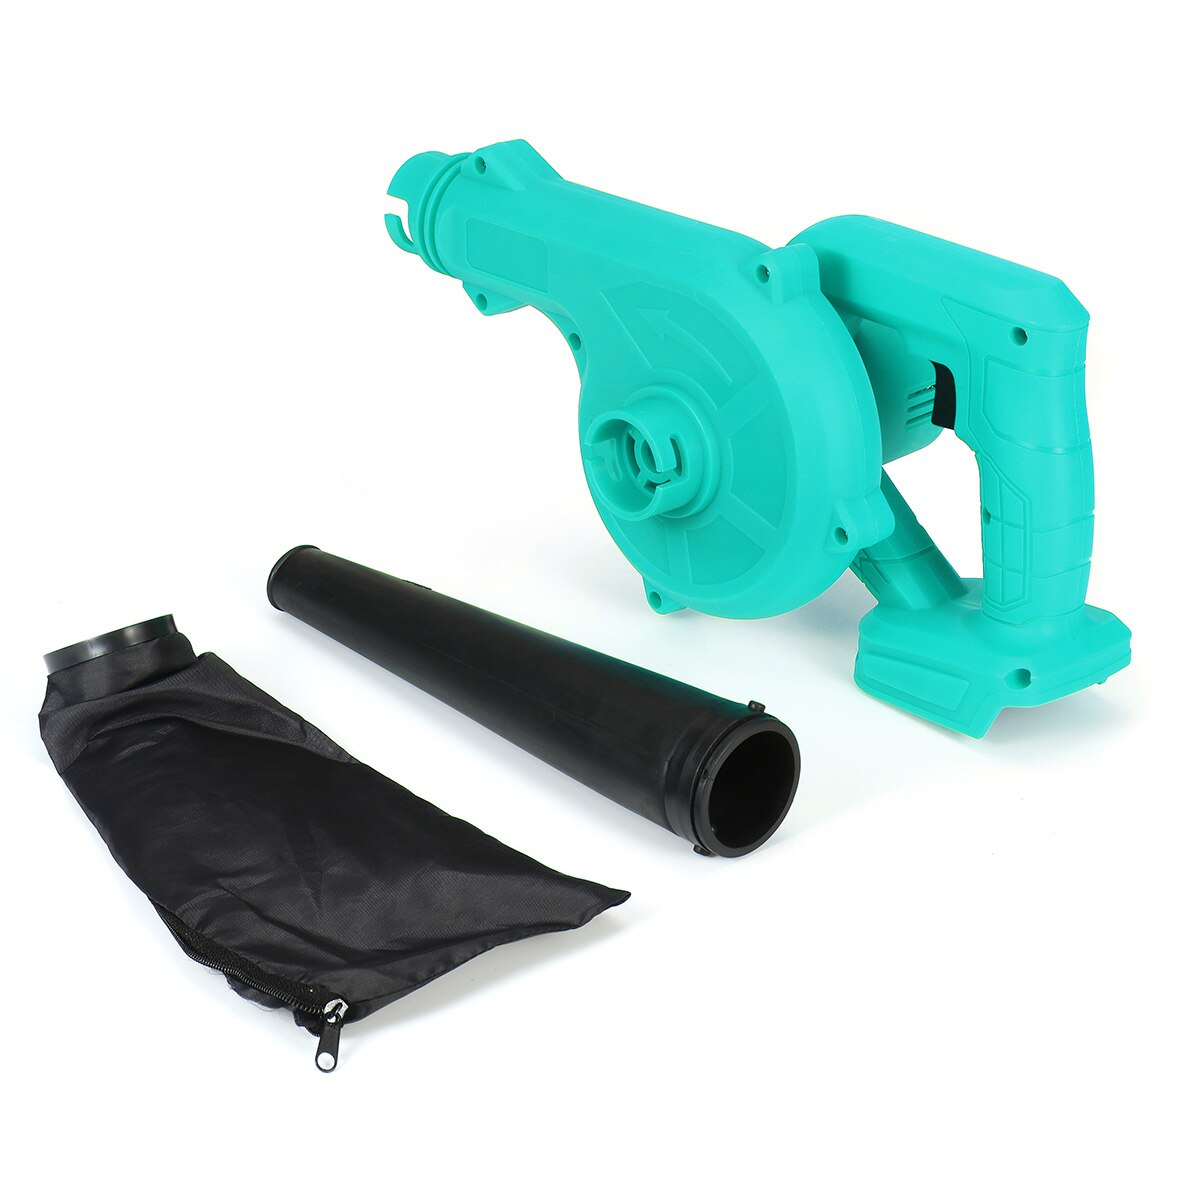 Rechargeable Blower for Makita 18V Battery Dedicated Cordless Blower Air Flow Adjustment Vacuum Cleaner Electric Tool w/suction: Blue